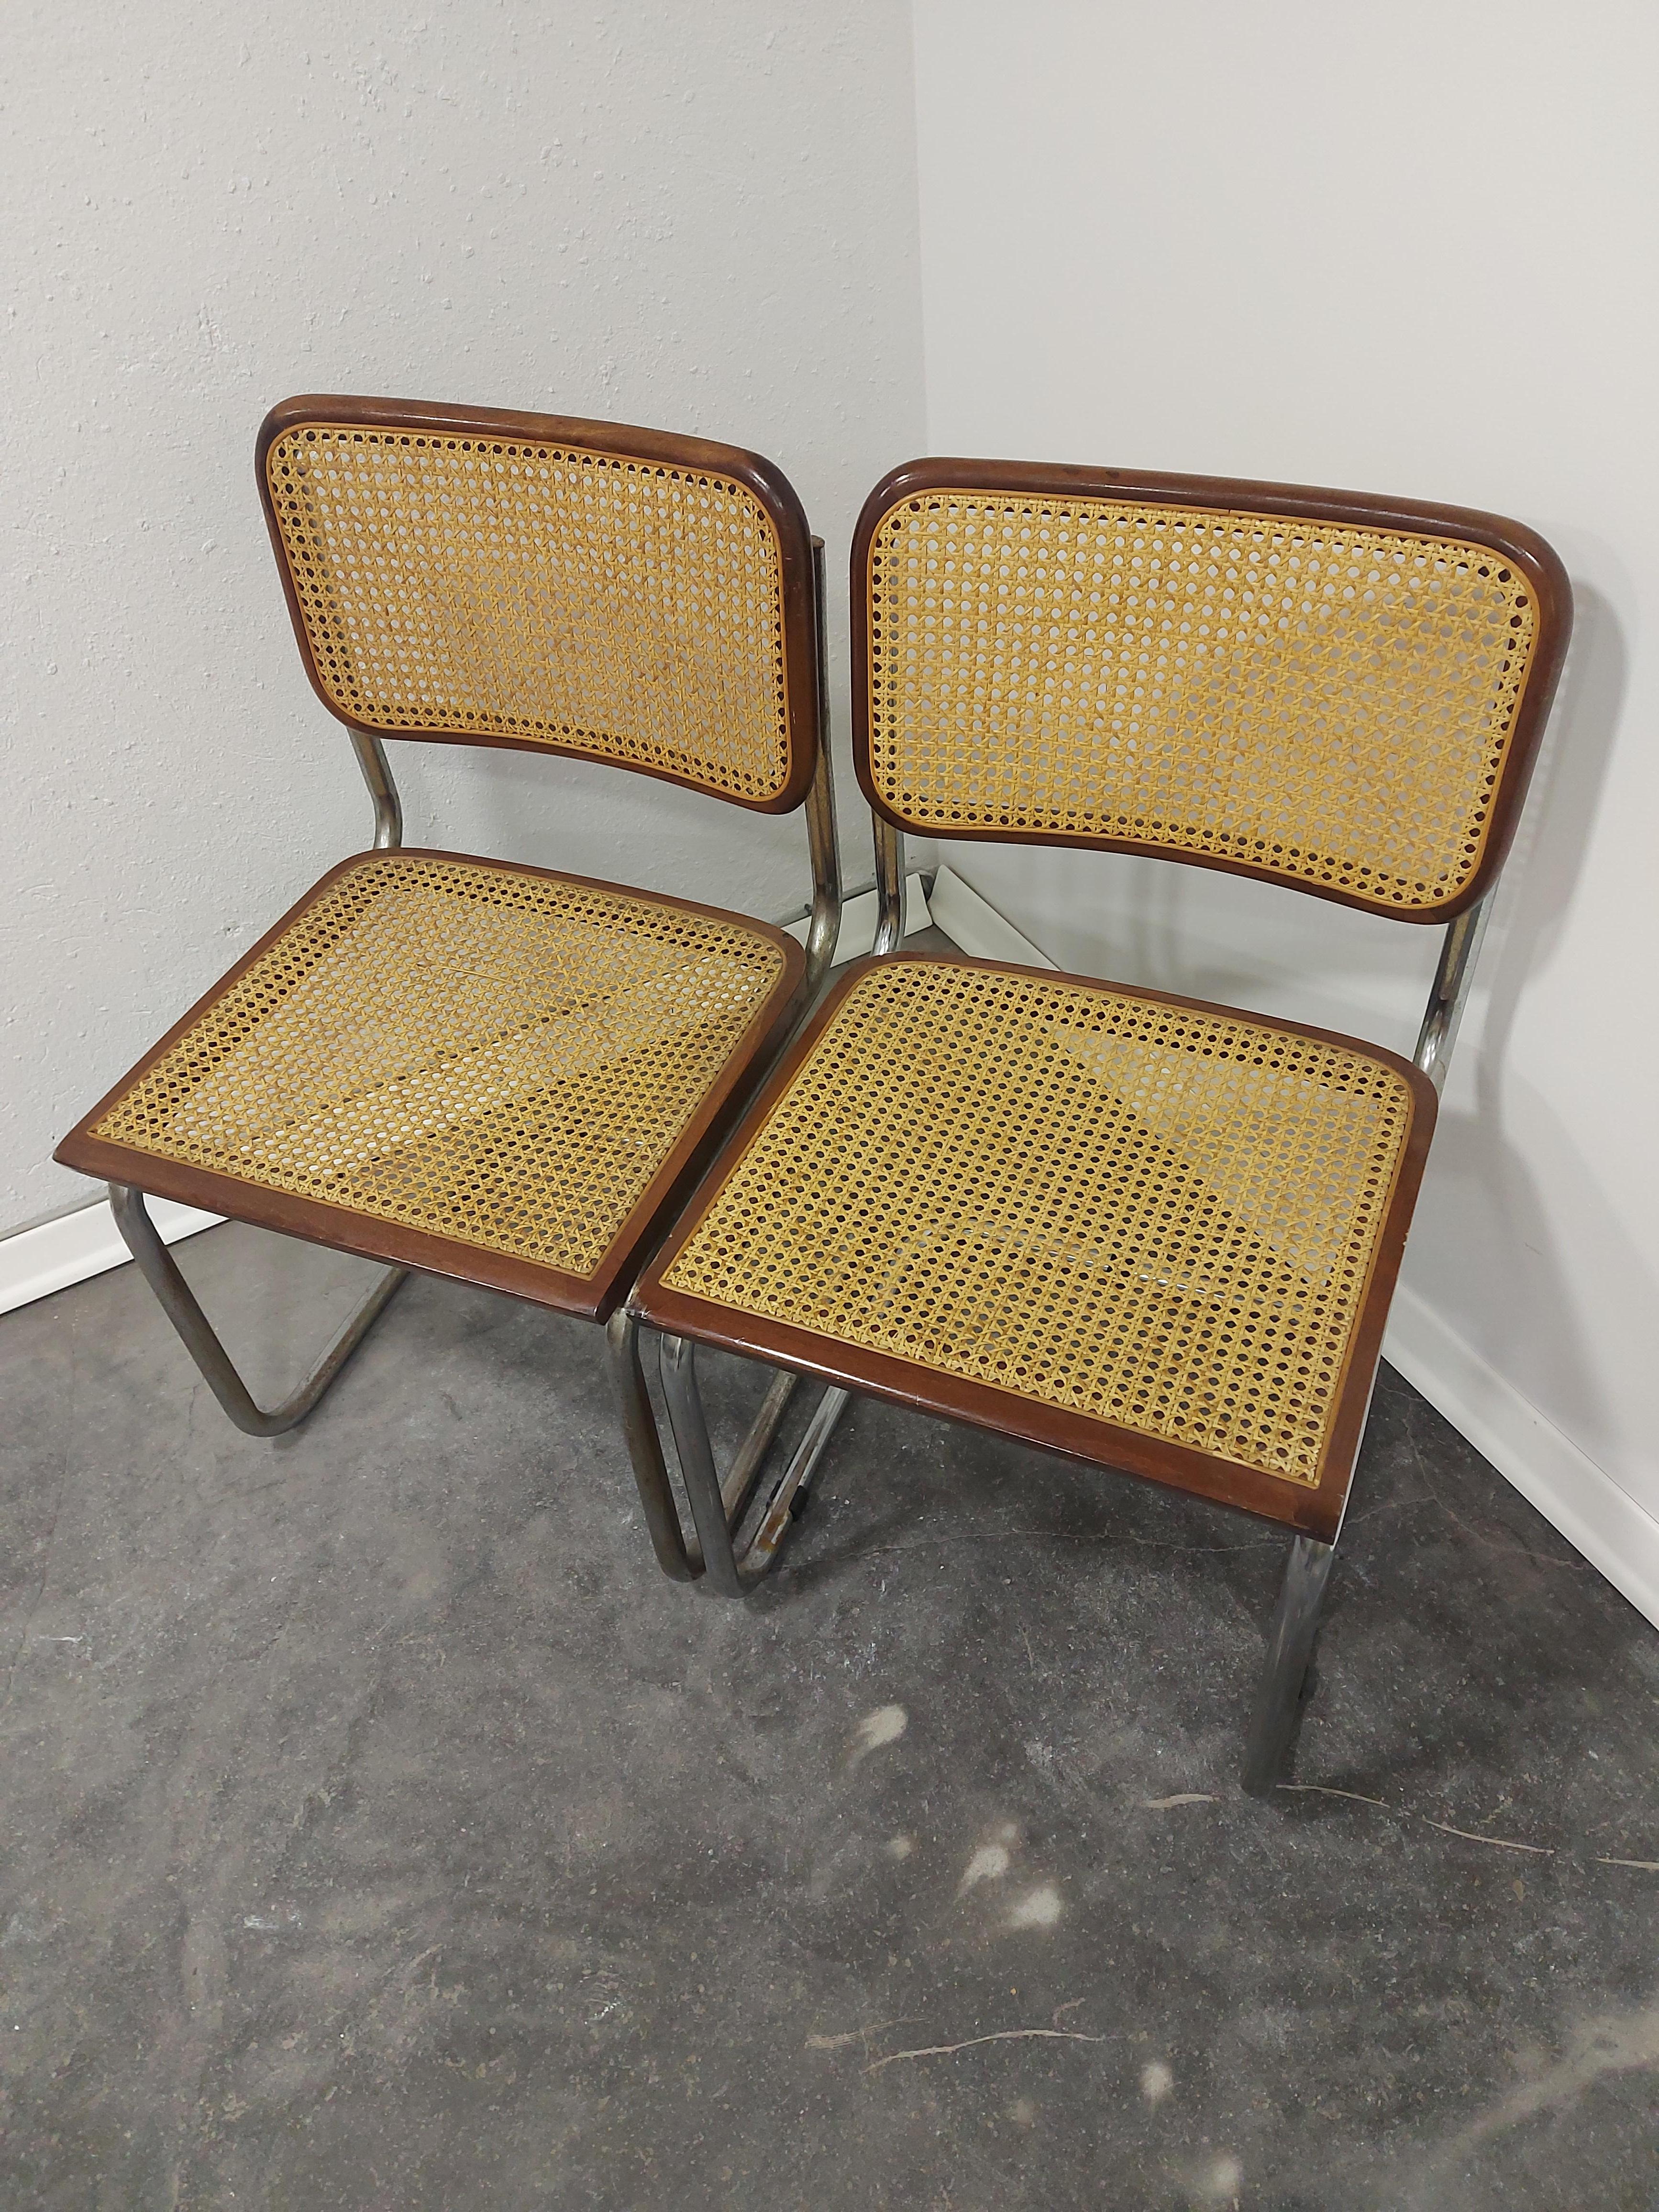 Cesca Chair by Marcel Breuer 1970s B32 1 of 5 In Good Condition For Sale In Ljubljana, SI